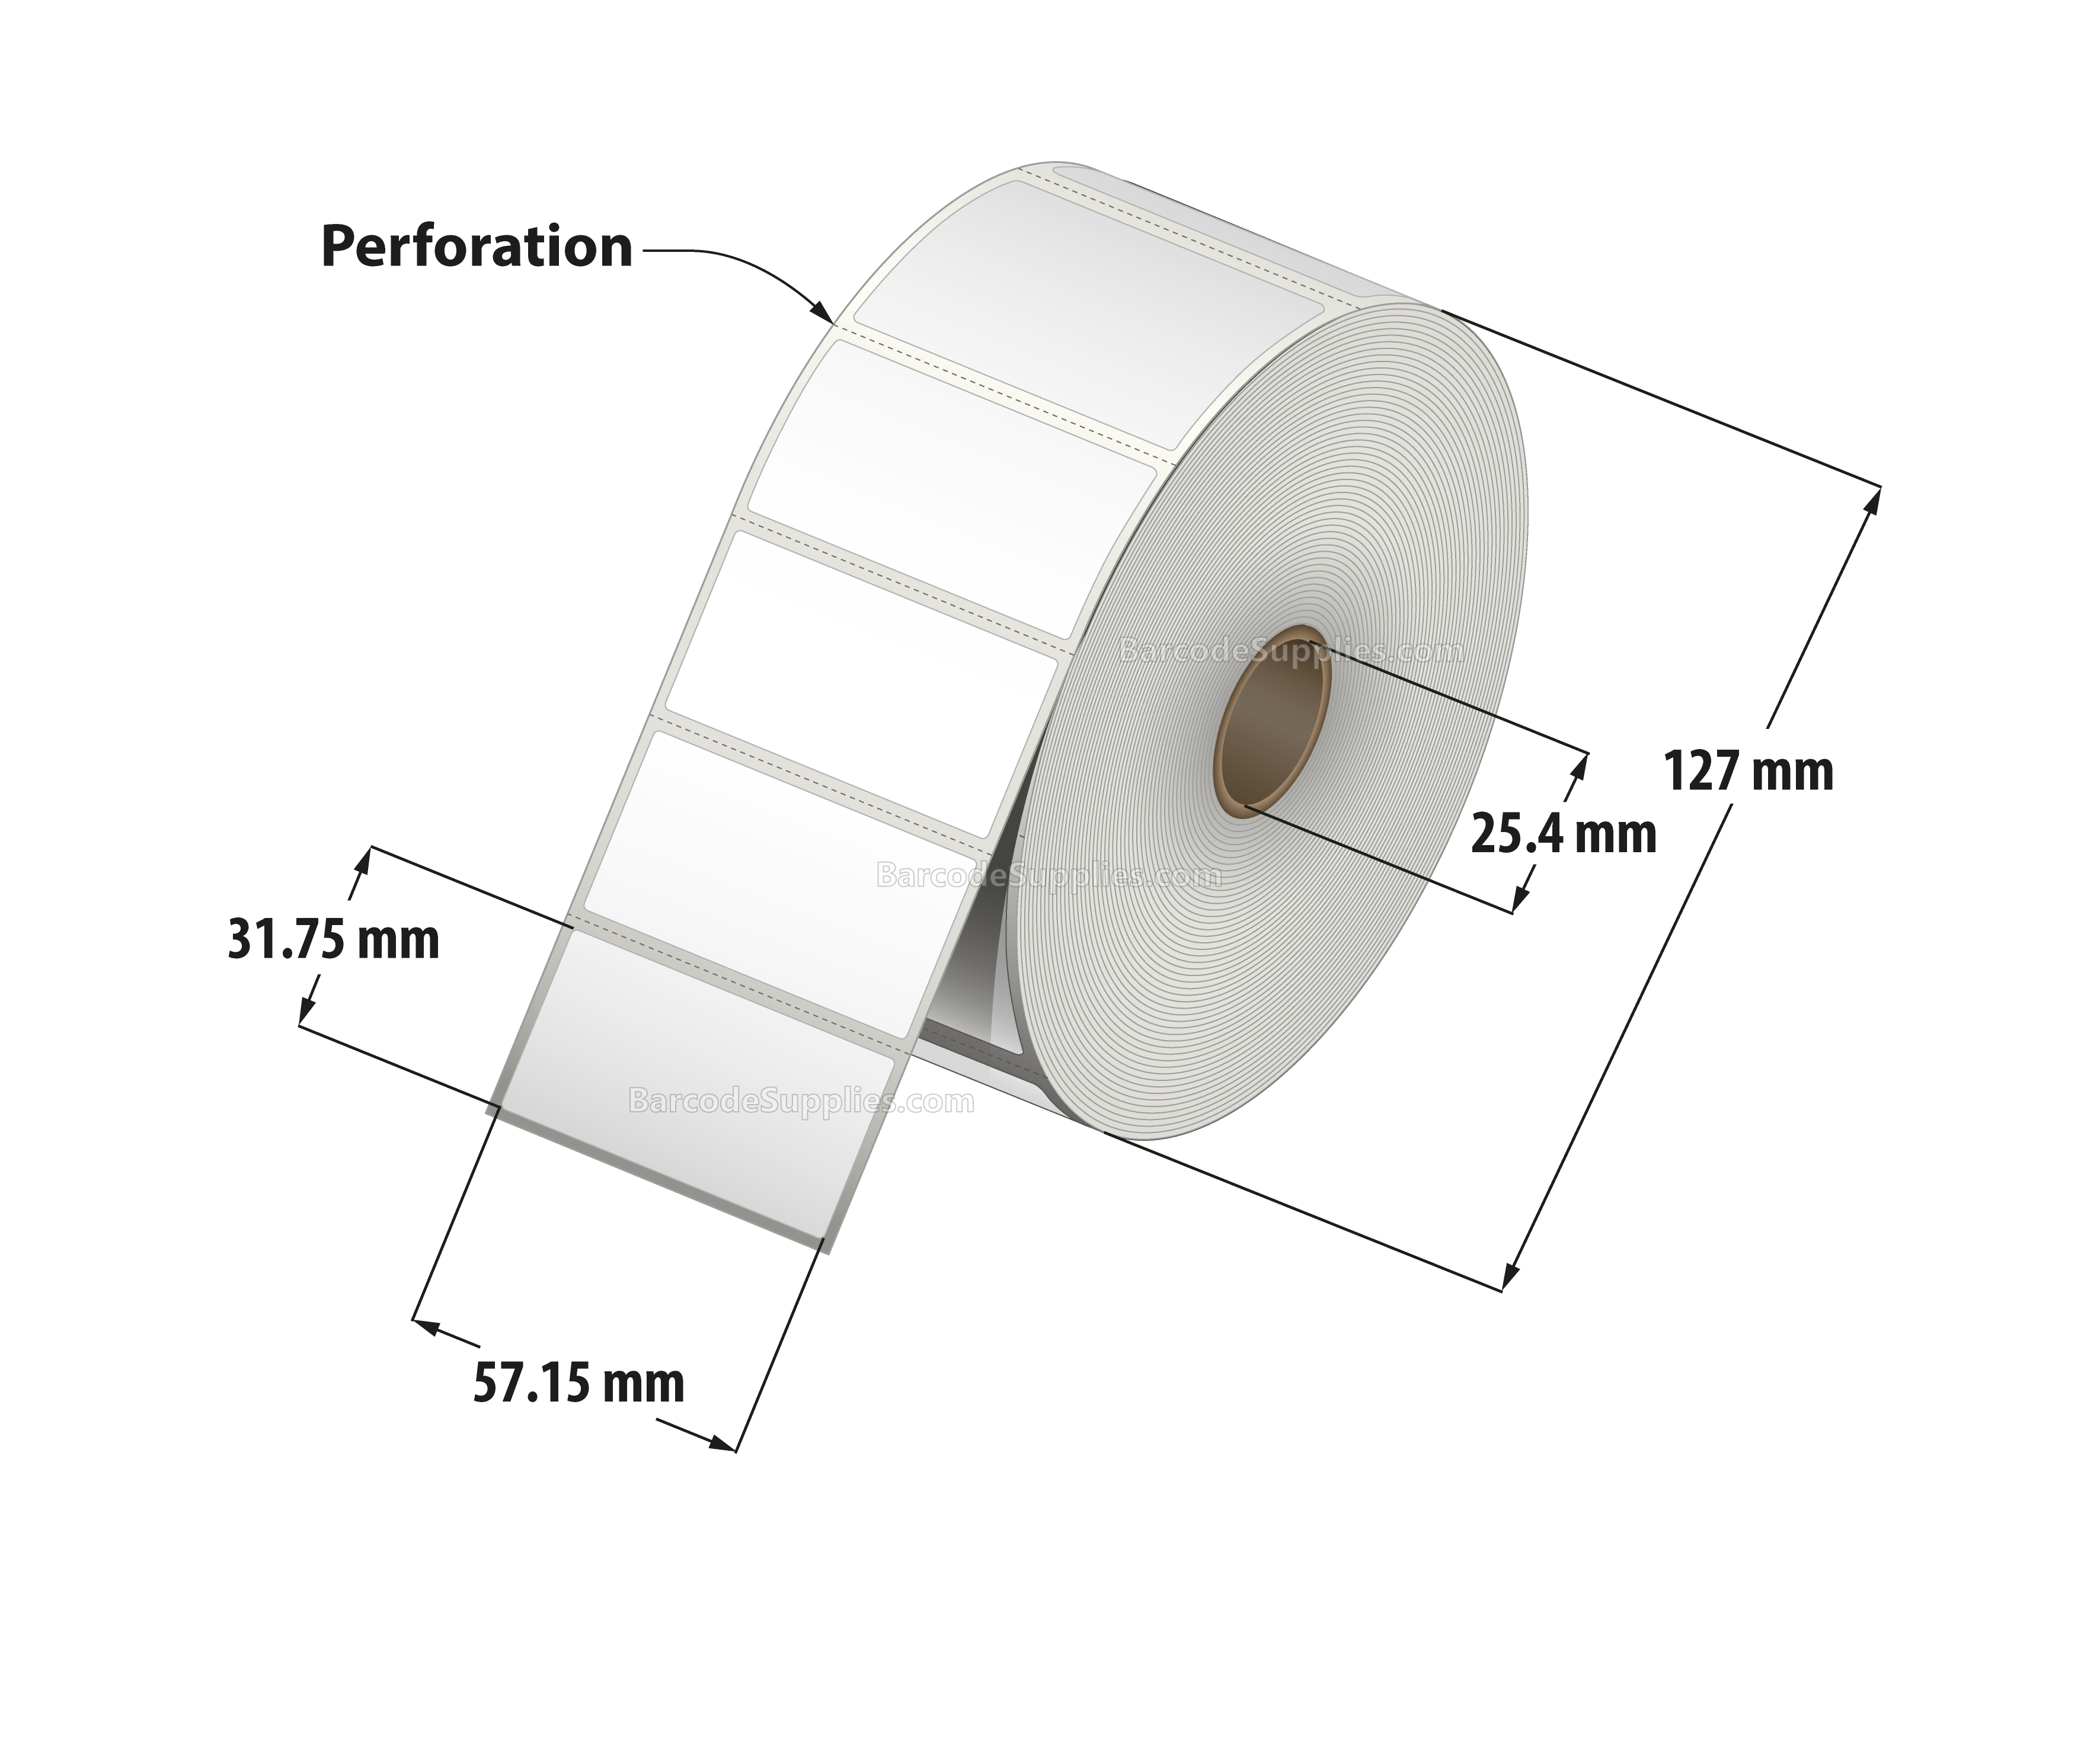 2.25 x 1.25 Direct Thermal White Labels With Acrylic Adhesive - Perforated - 2100 Labels Per Roll - Carton Of 12 Rolls - 25200 Labels Total - MPN: RD-225-125-2100-1 - BarcodeSource, Inc.